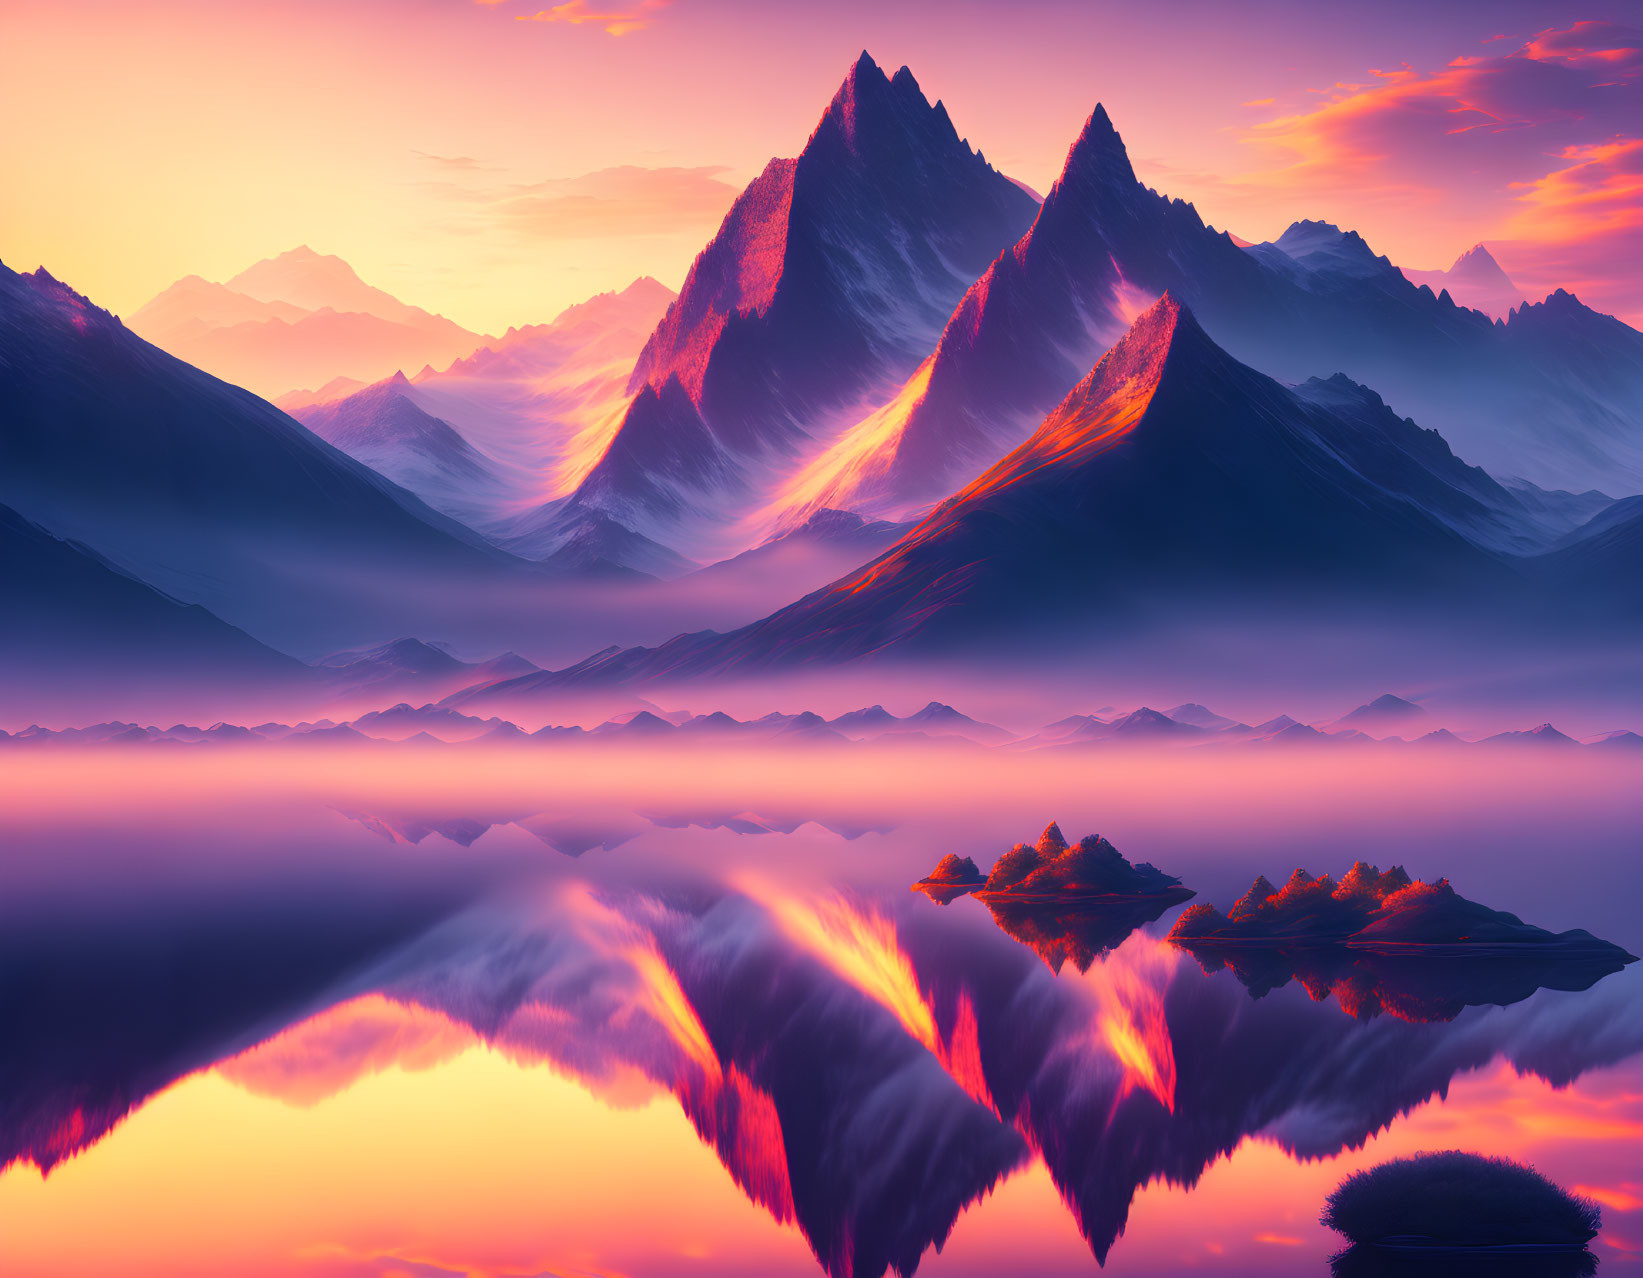 Tranquil landscape: vibrant sunset over majestic mountains and mirrored lake